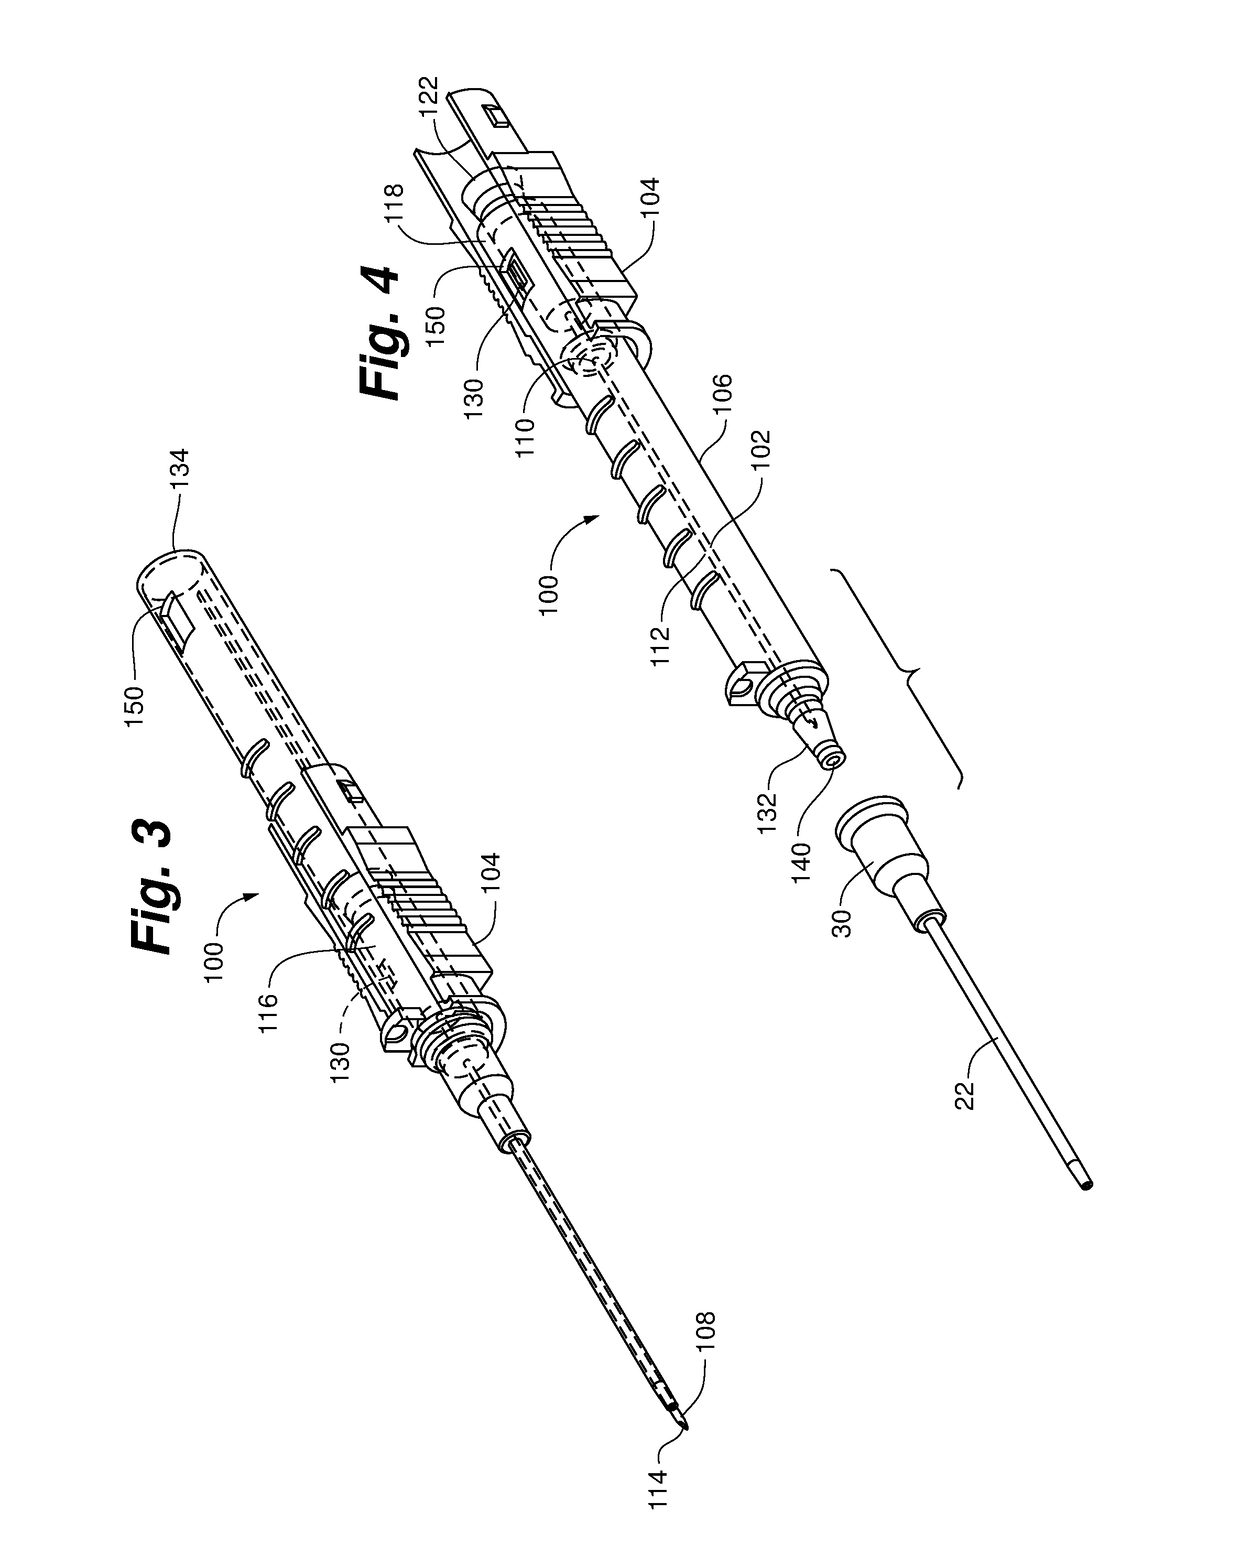 Needle assembly with diagnostic analysis provisions